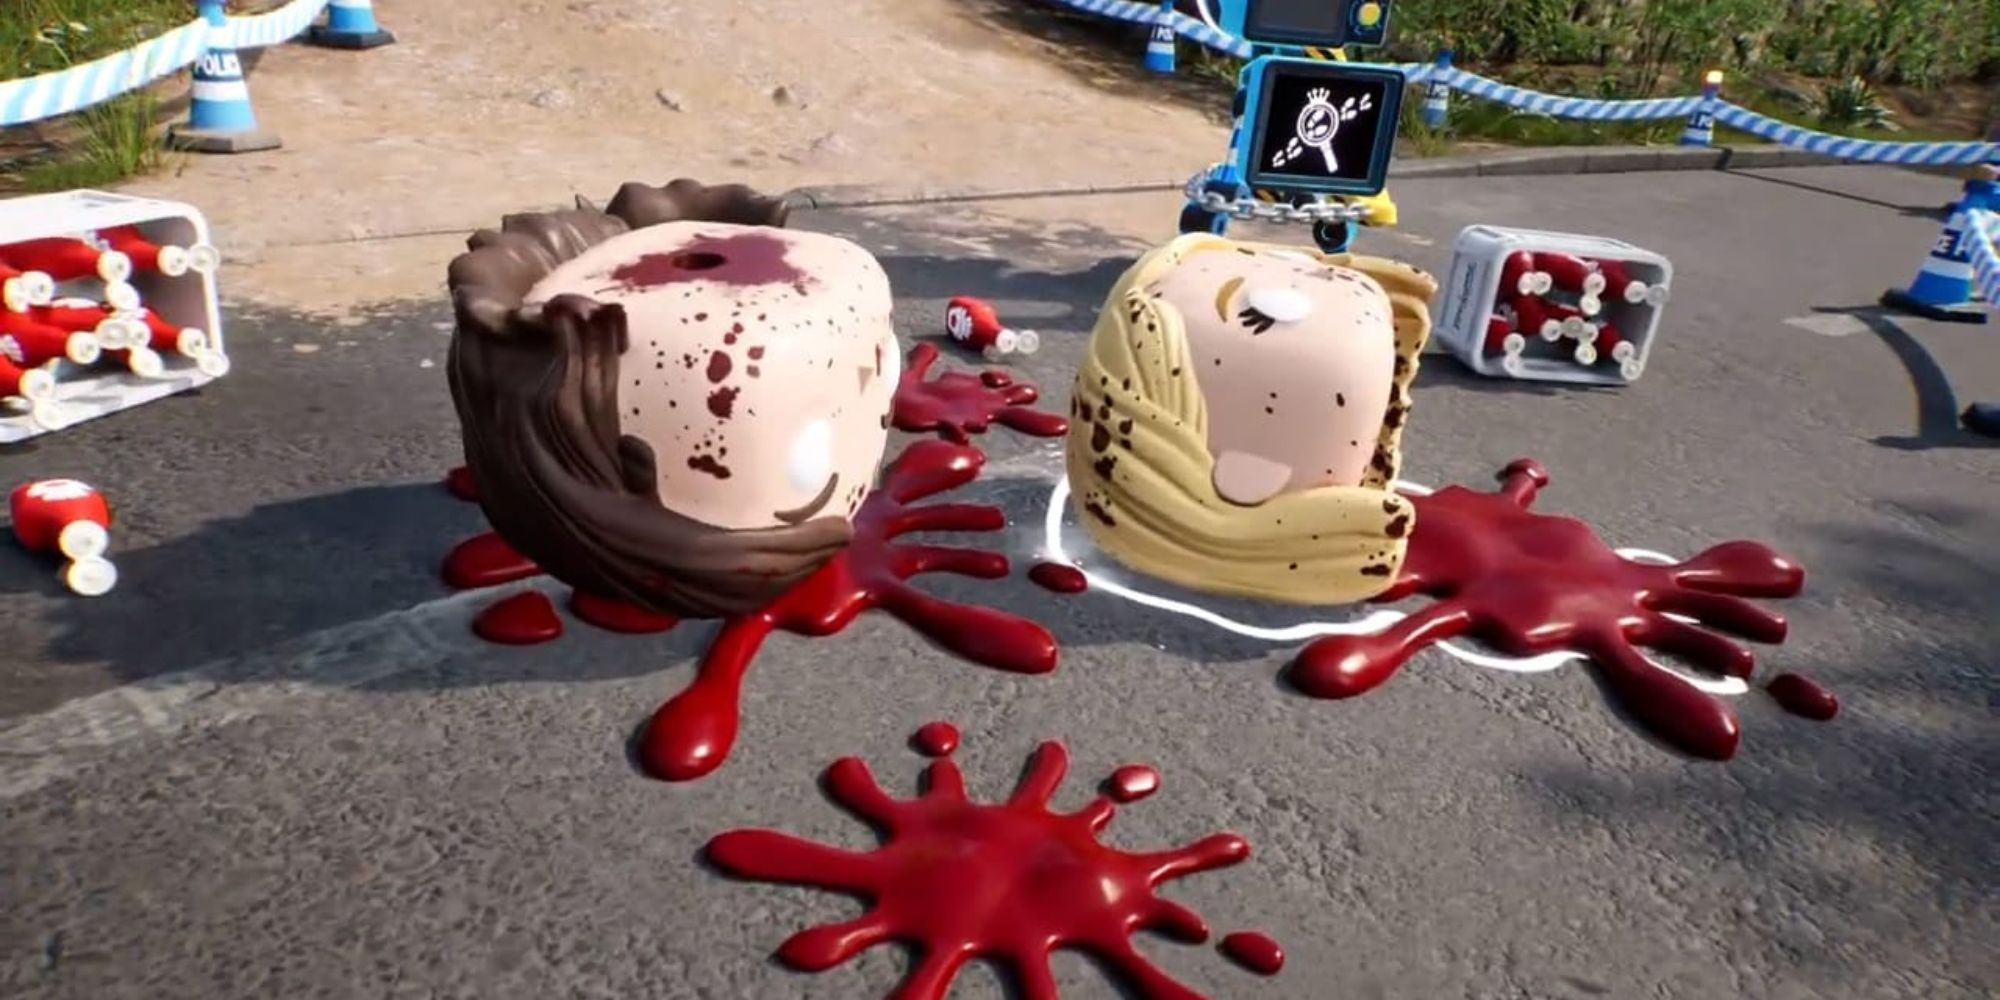 Still from Funko Fusion showing decapitated figures lying on a bloody road.